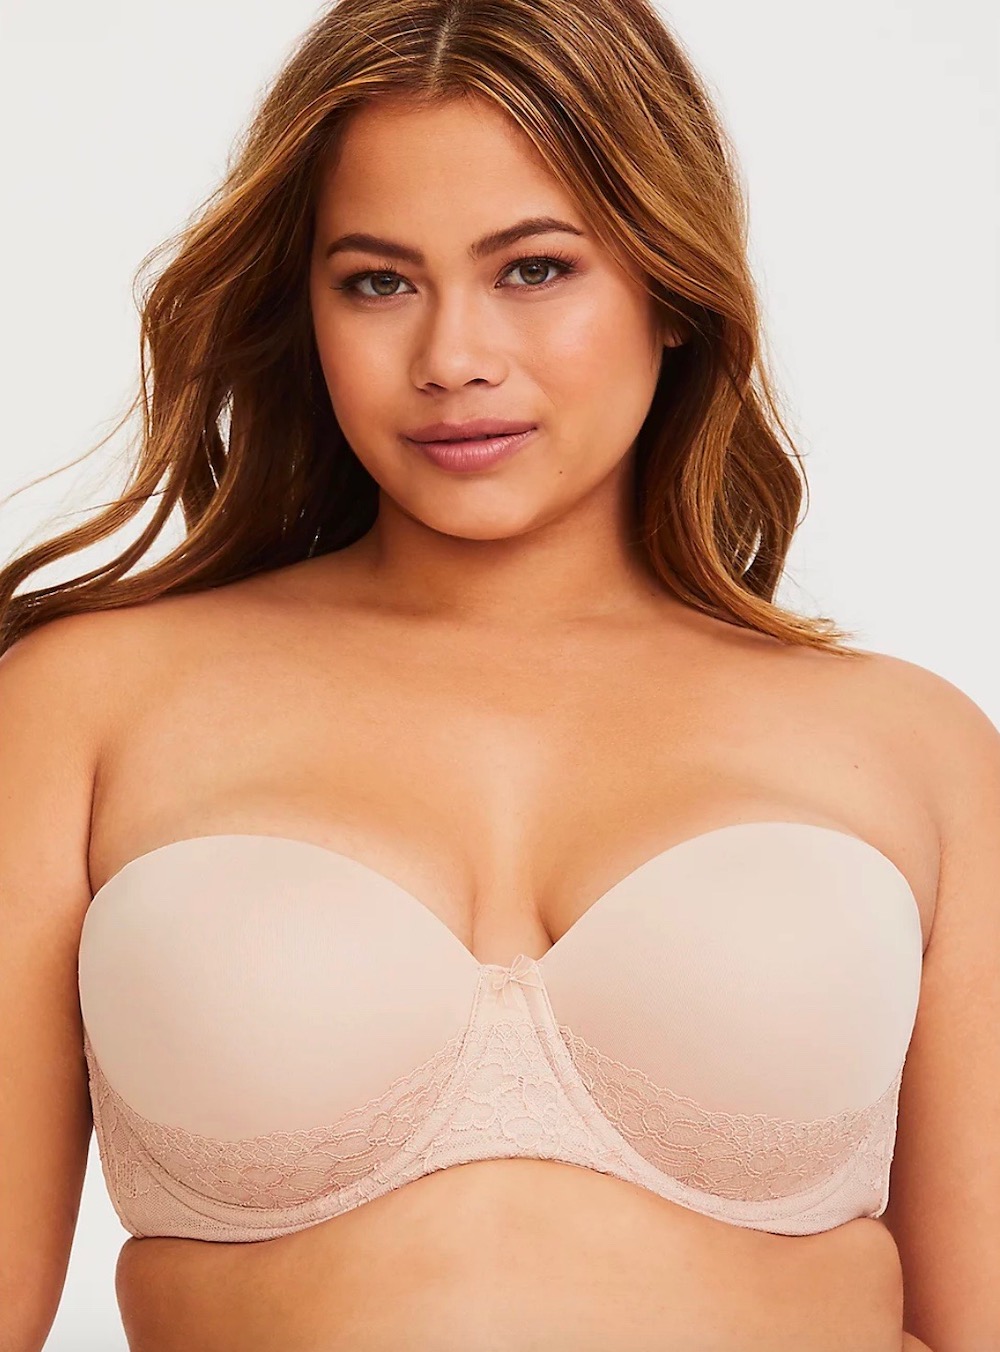 https://www.thefashionspot.com/wp-content/uploads/sites/11/gallery/best-strapless-bras-for-big-busts/Torrid-Nude-Microfiber-Lace-Push-Up-Multiway-Strapless-Bra.jpg